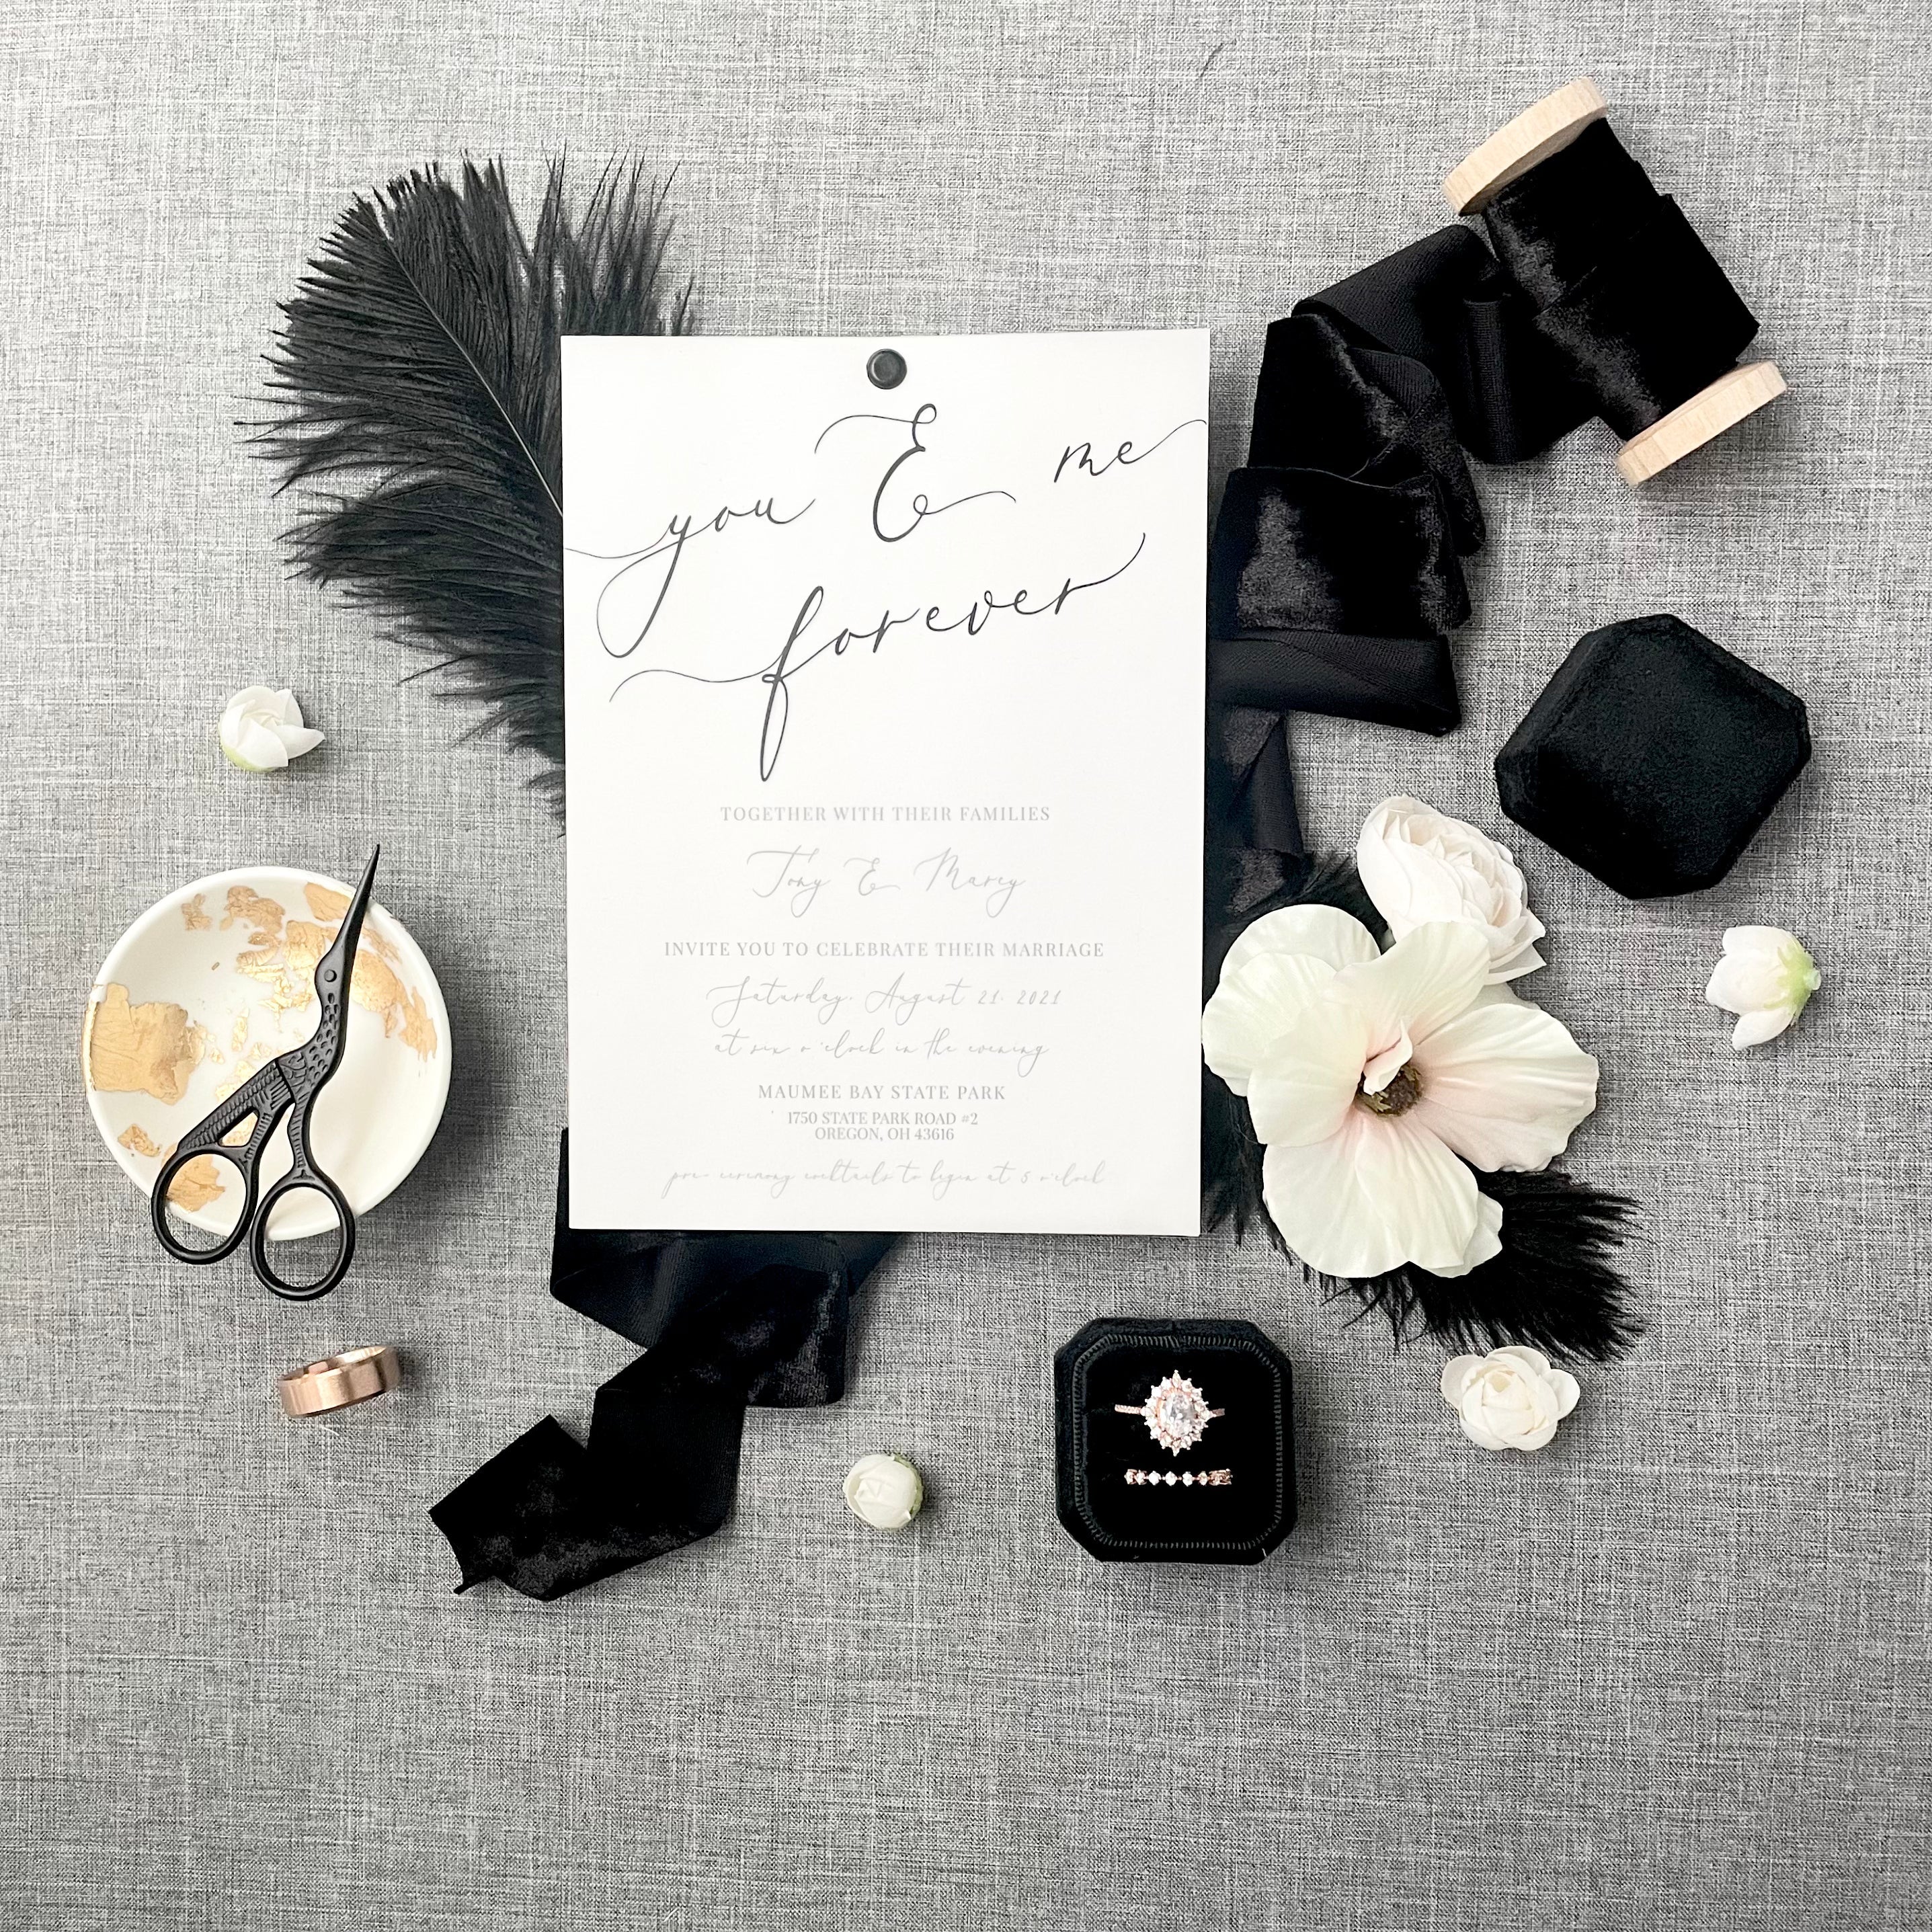 Black velvet ribbon styled with black ring box, wedding invitation, black scissors and florals  -  Wedding Flat lay props from Champagne & GRIT